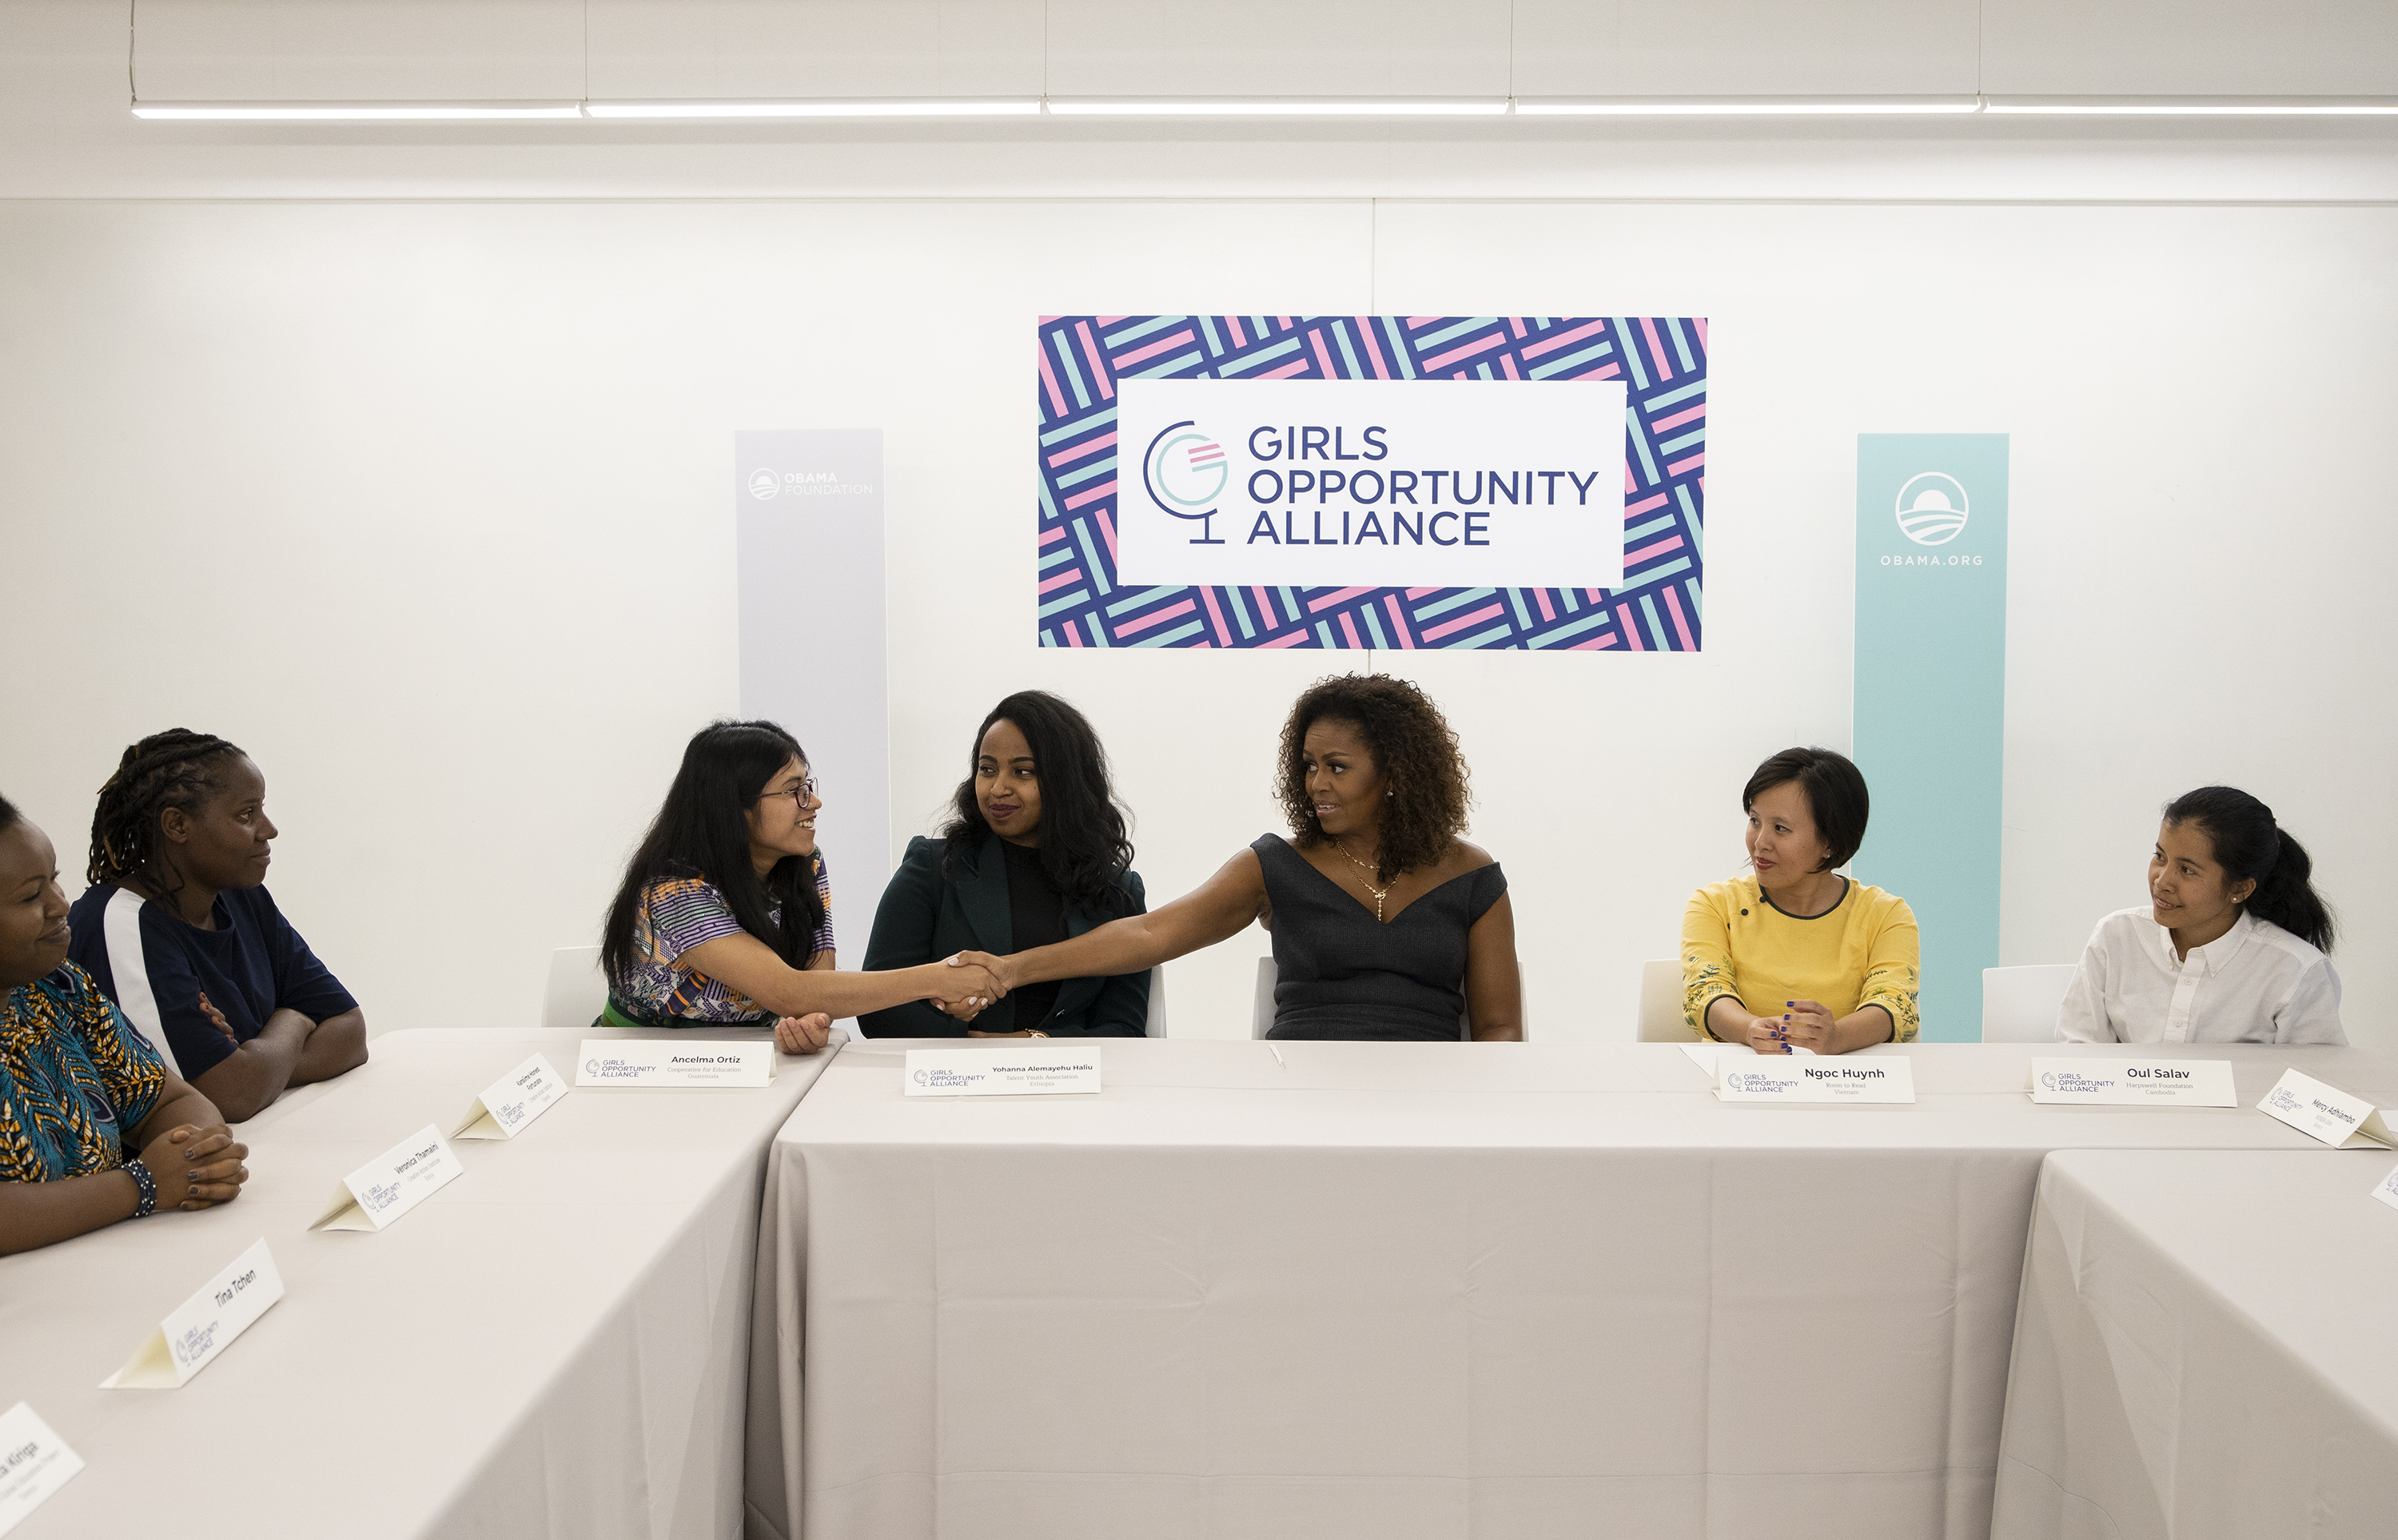 Mrs. Obama participates in the roundtable with girls from around the world.